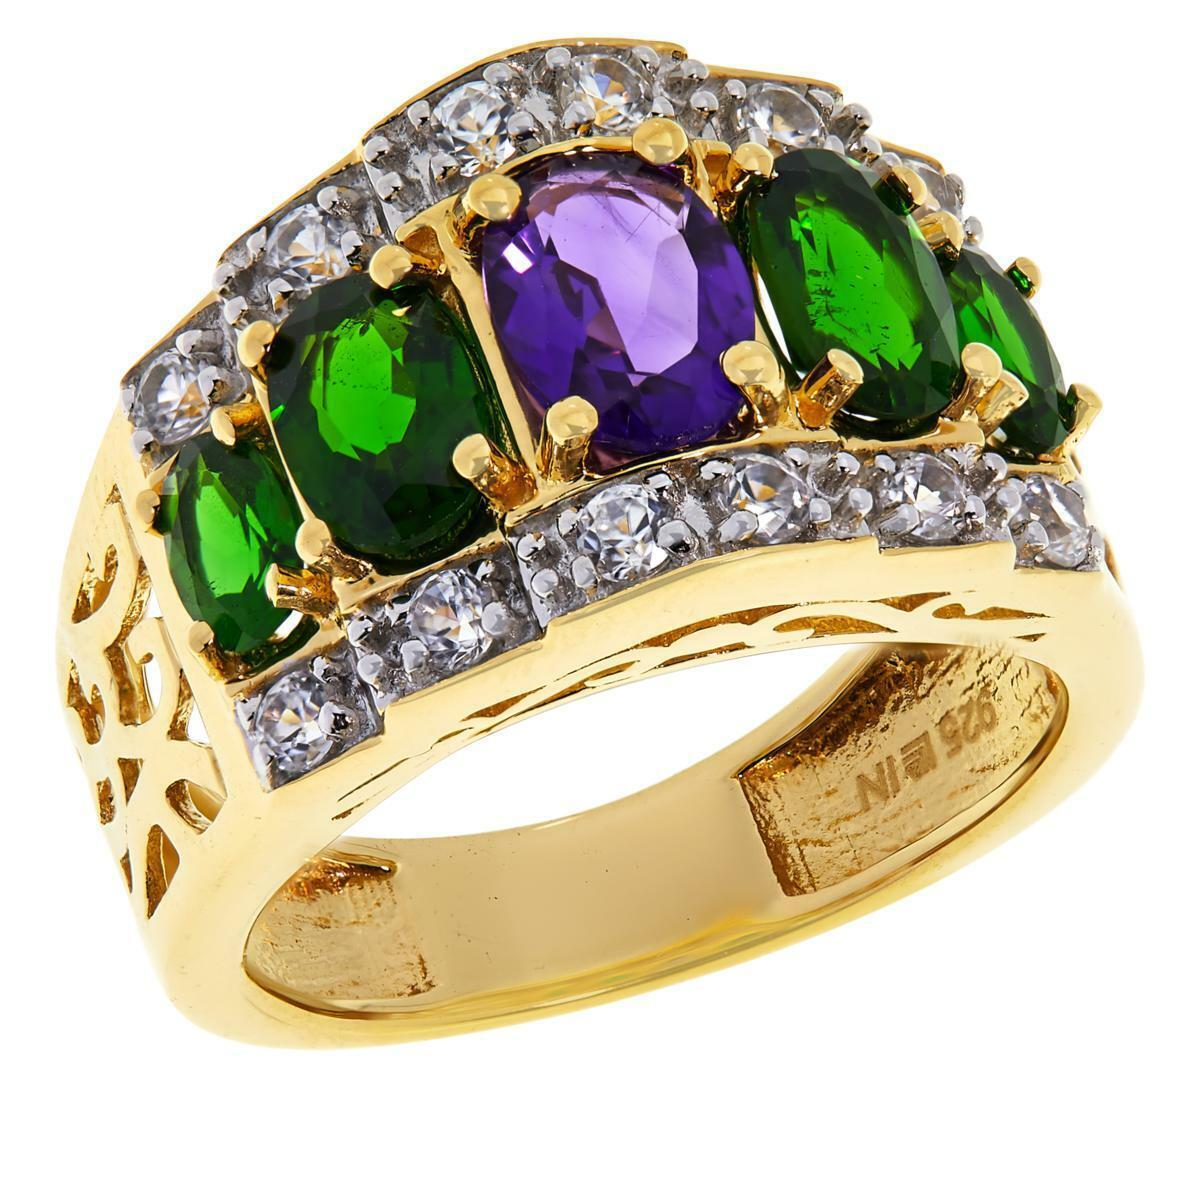 Colleen Lopez Gold-Plated Amethyst, Chrome Diopside and Zircon Ring, Size 7